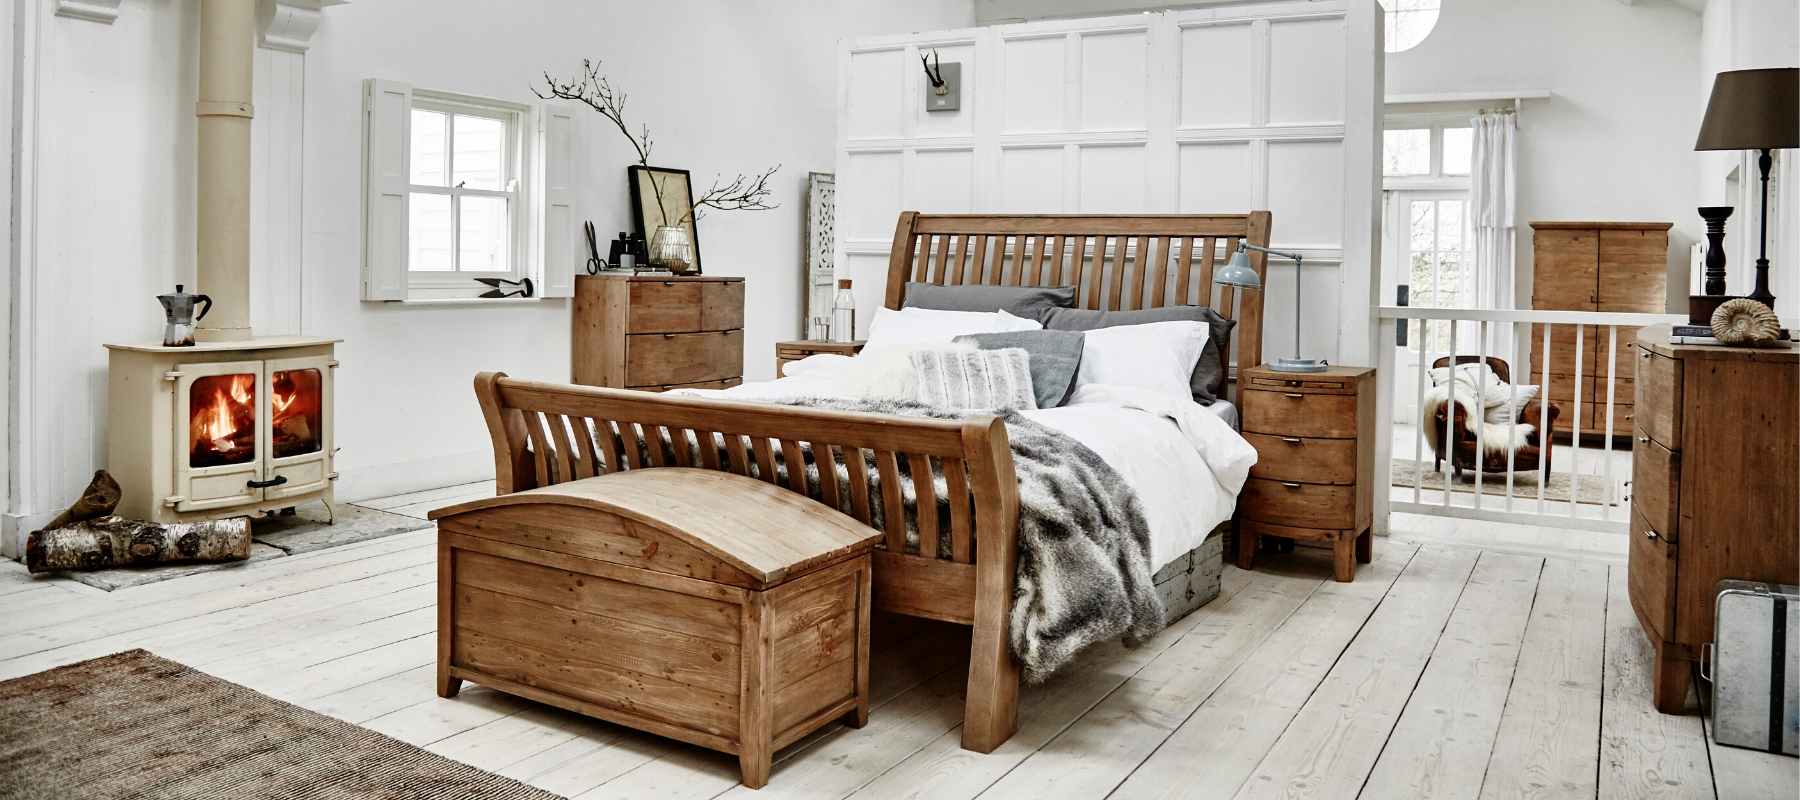 Rustic styled white bedroom including reclaimed wood bed, blanket box and chest of drawers